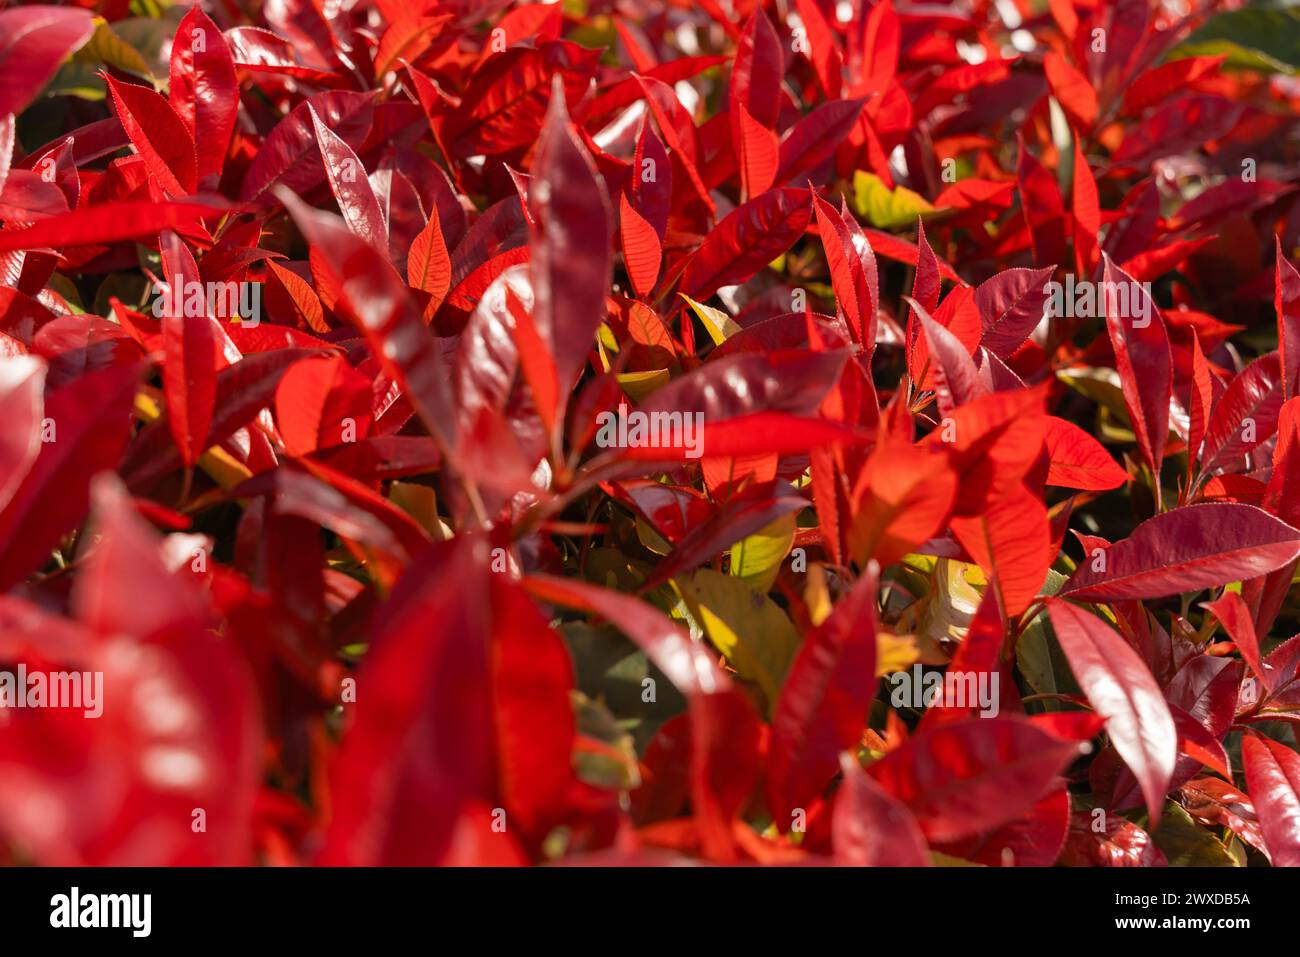 Photinia, Little Red Robin, Hedging, formal hedging, low-maintenance borders, exciting, colourful evergreen, hedges, specimen plant, brilliant red. Stock Photo